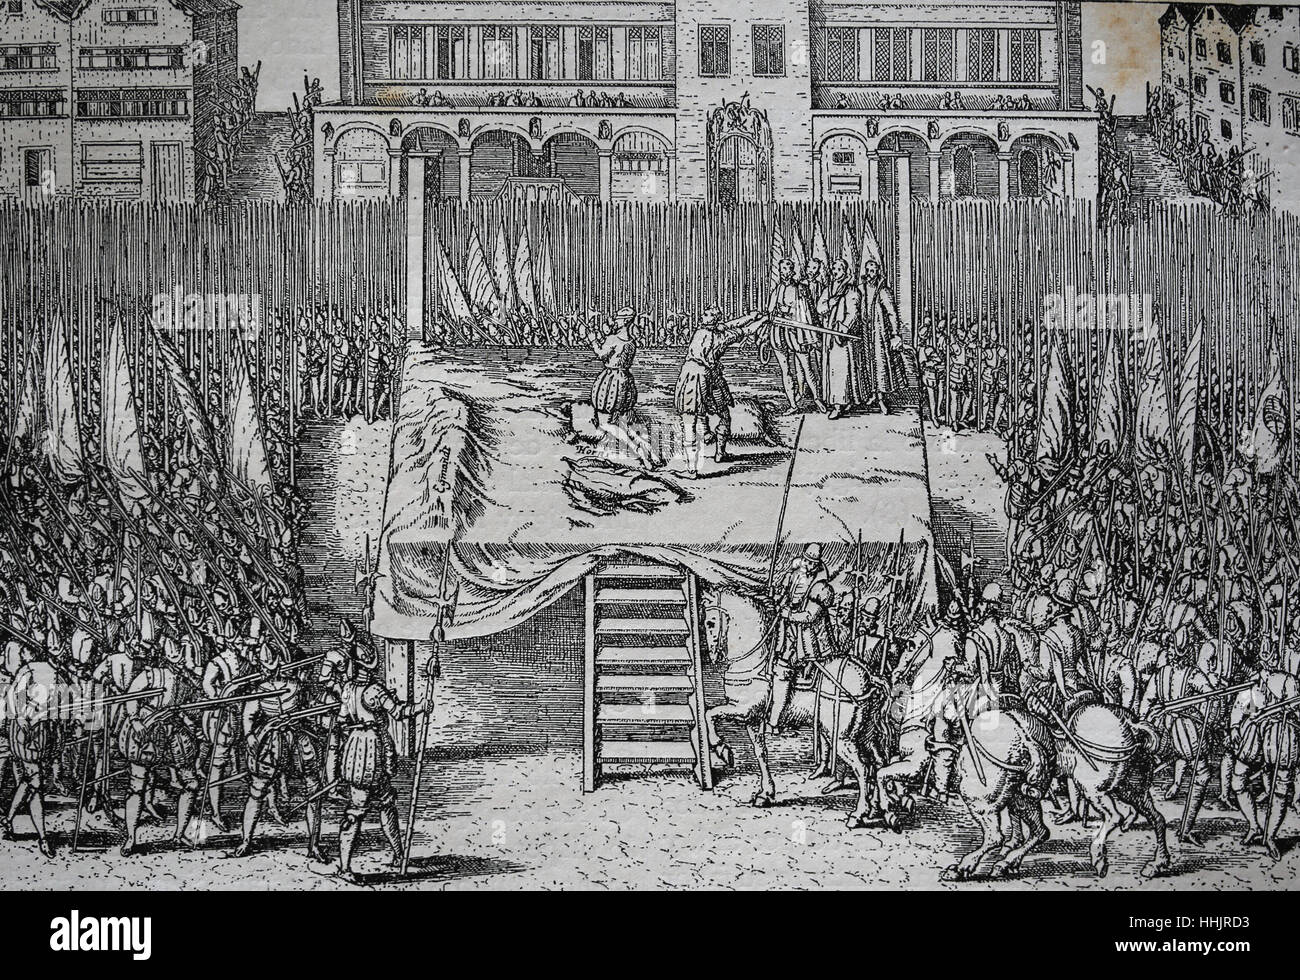 Spanish Netherlands. Execution of Counts Egmont and Hoorn in Brussels, 5 June 1568. Engraving by Franz Hogenberg (c. 1540-1590). Copy. Stock Photo